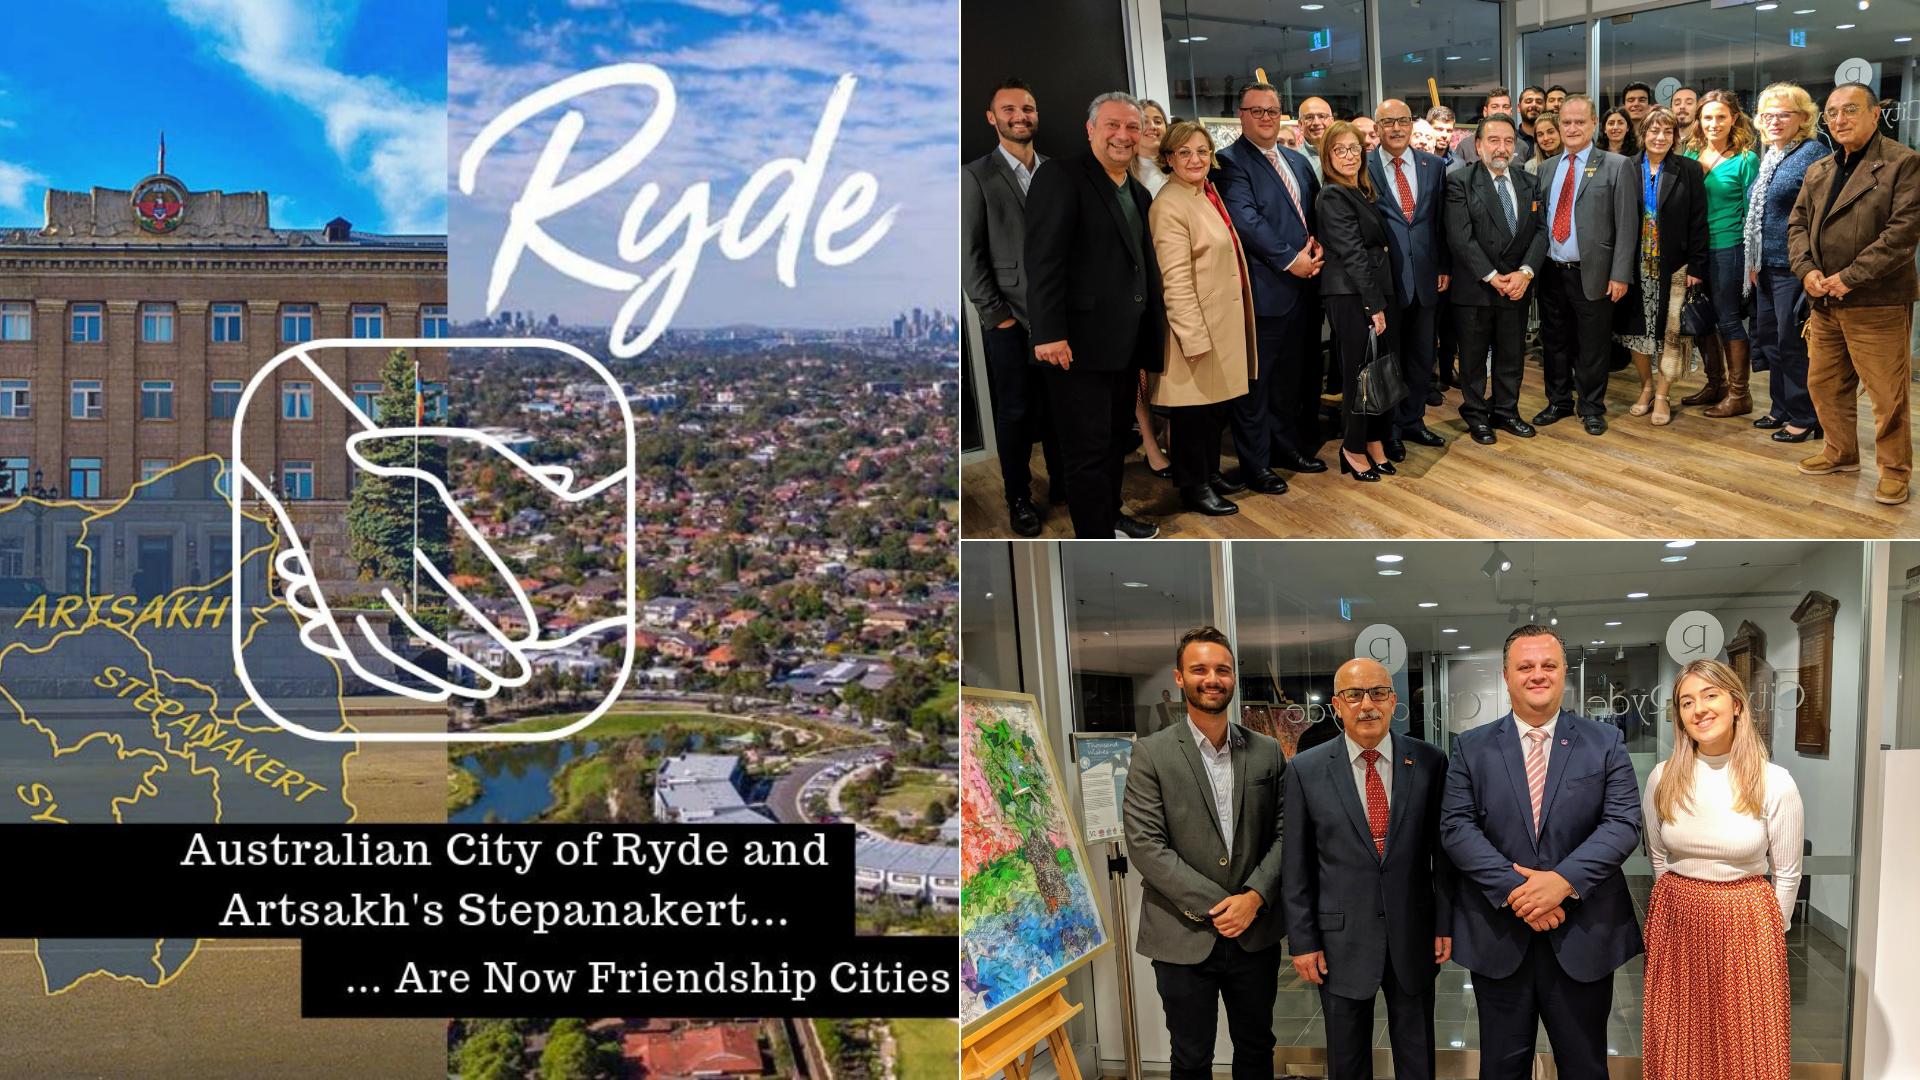 Ryde City in Australia Votes Unanimously to Form Friendship City with Stepanakert in Artsakh